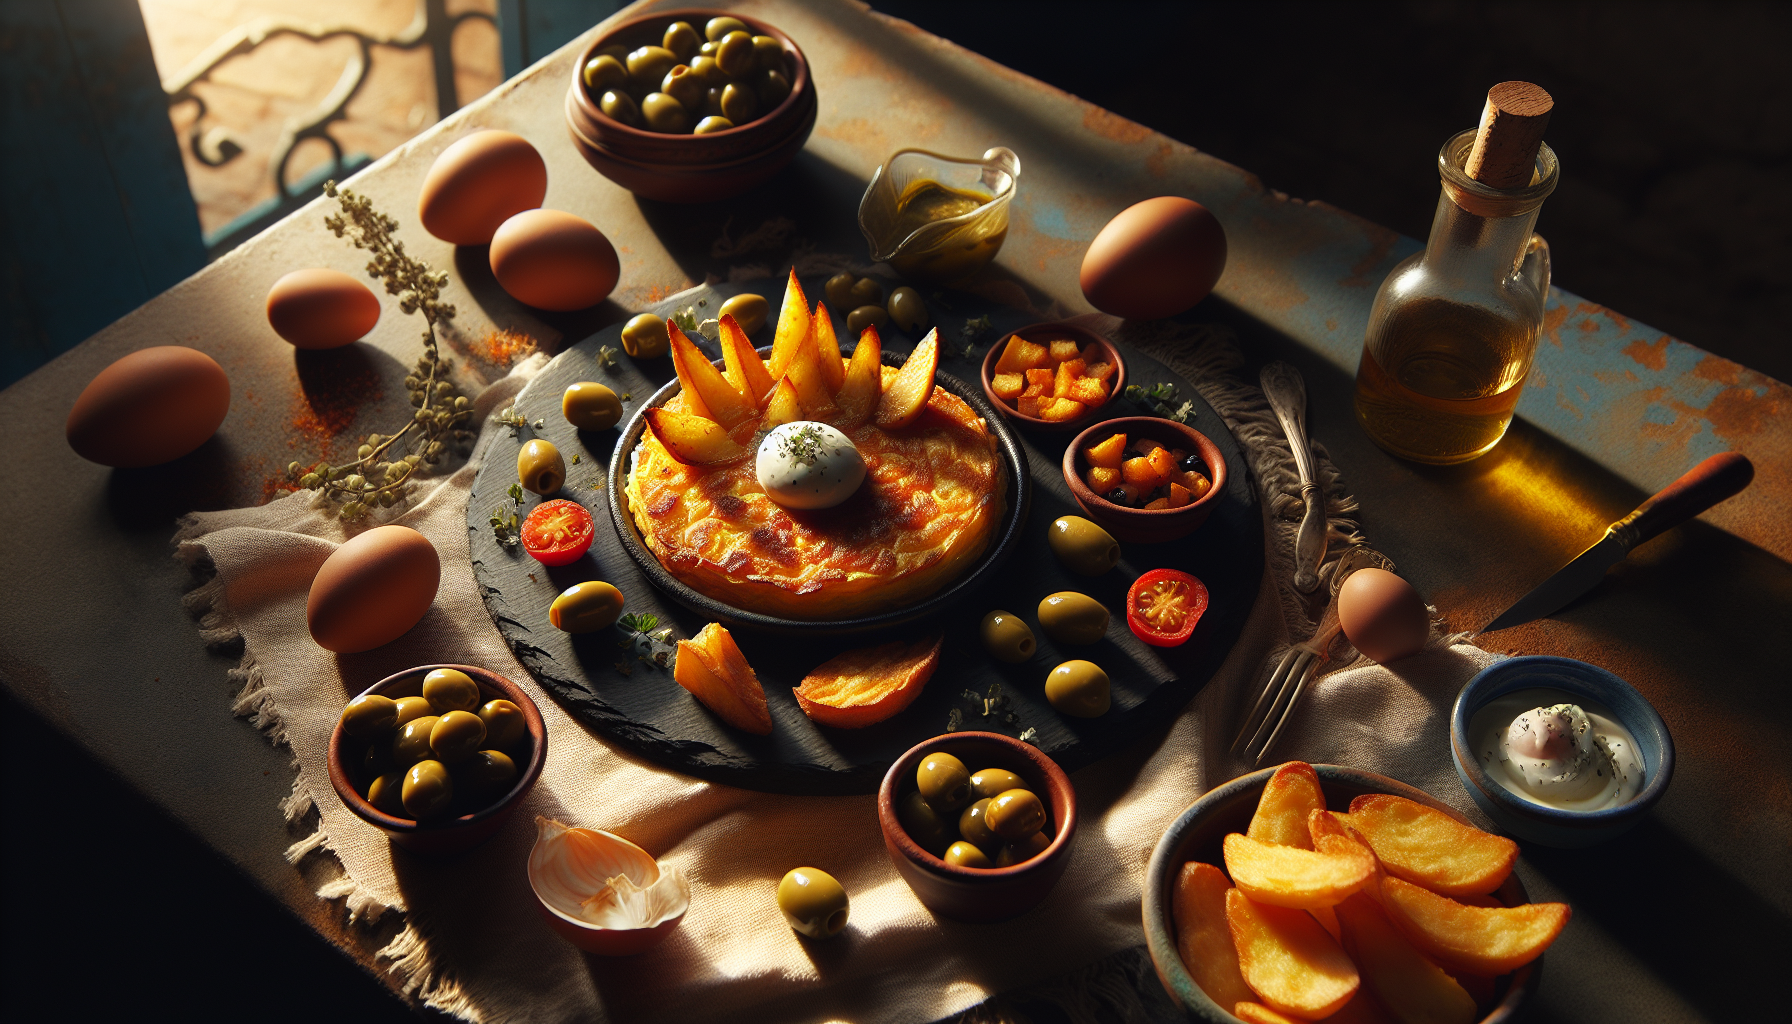 Can You Suggest A Simple And Quick Spanish Tapas Dish?